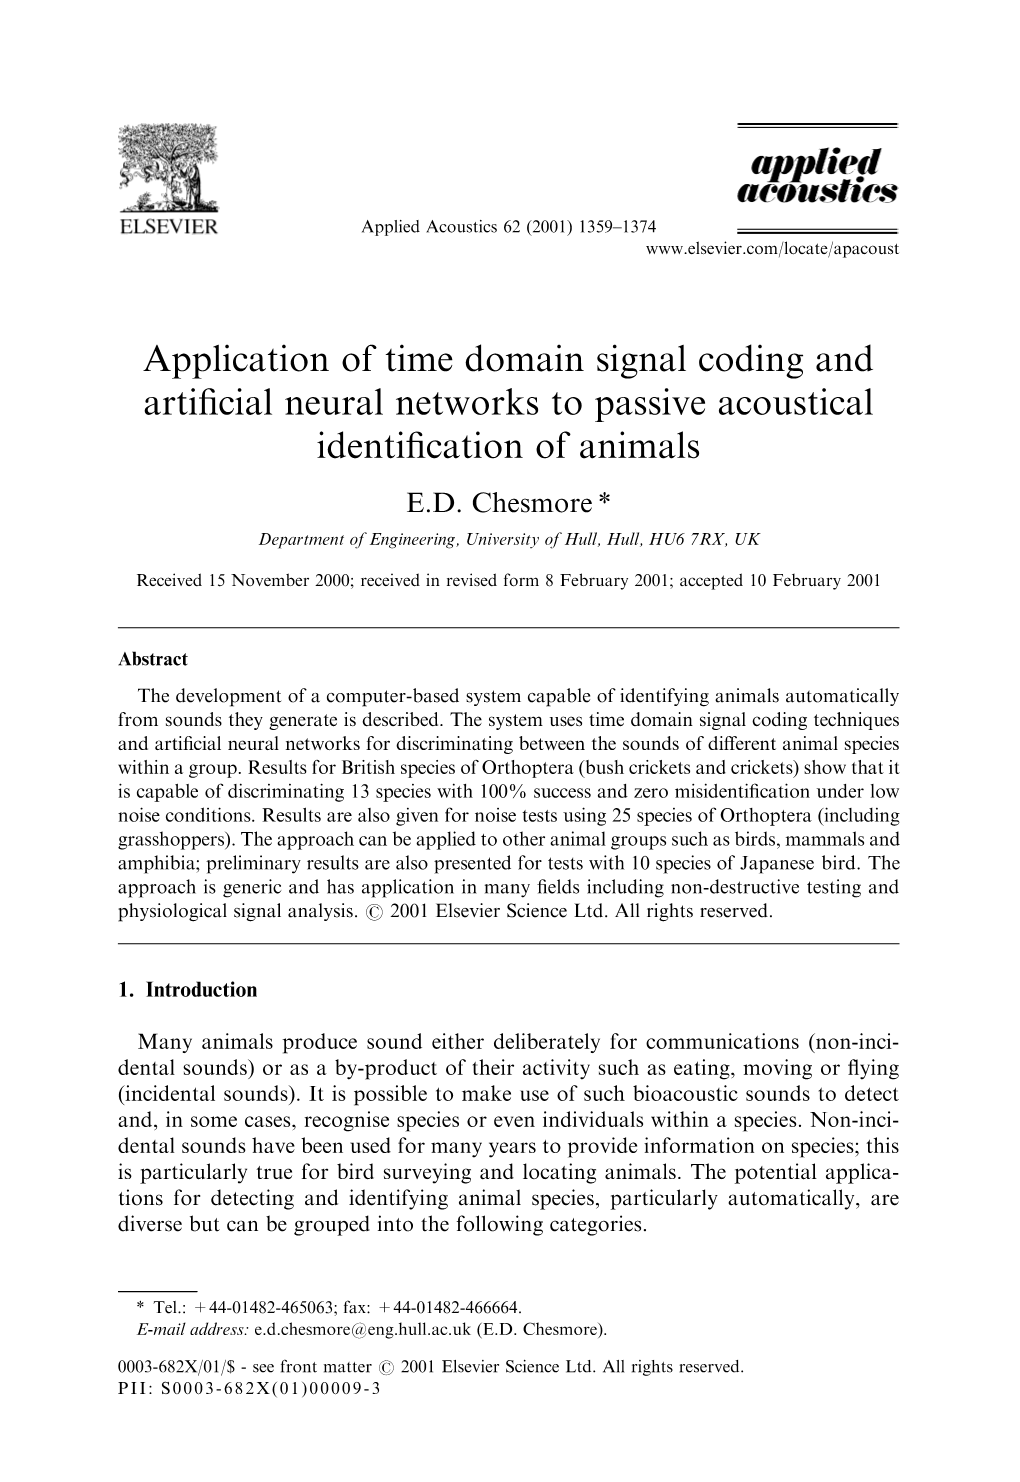 Application of Time Domain Signal Coding and Artificial Neural